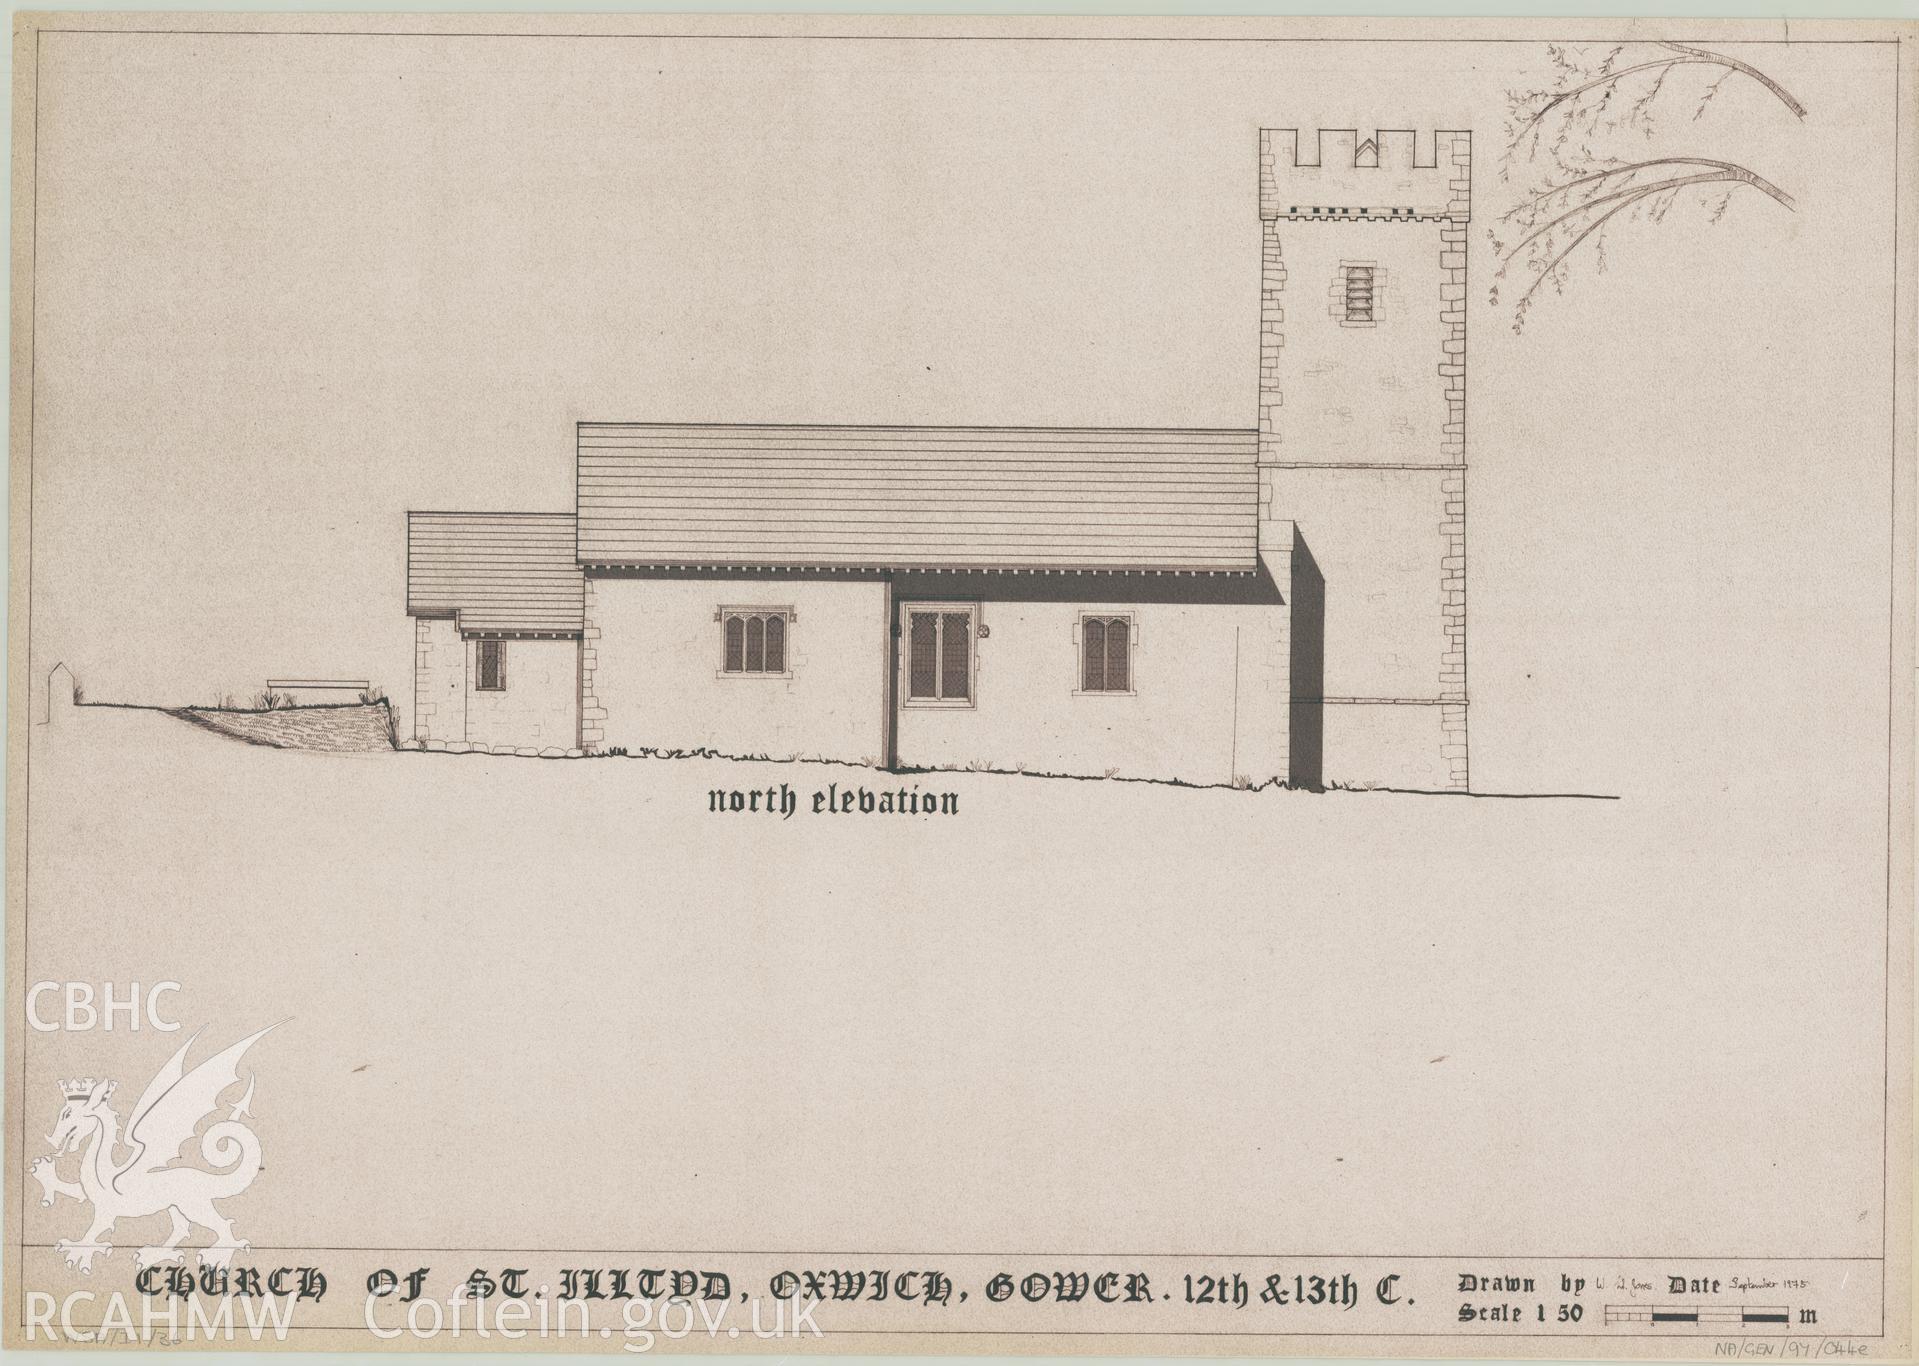 Measured drawing showing north elevation of St Illtyd's Church, Oxwich, produced by W.Ll. Jones, September 1975.